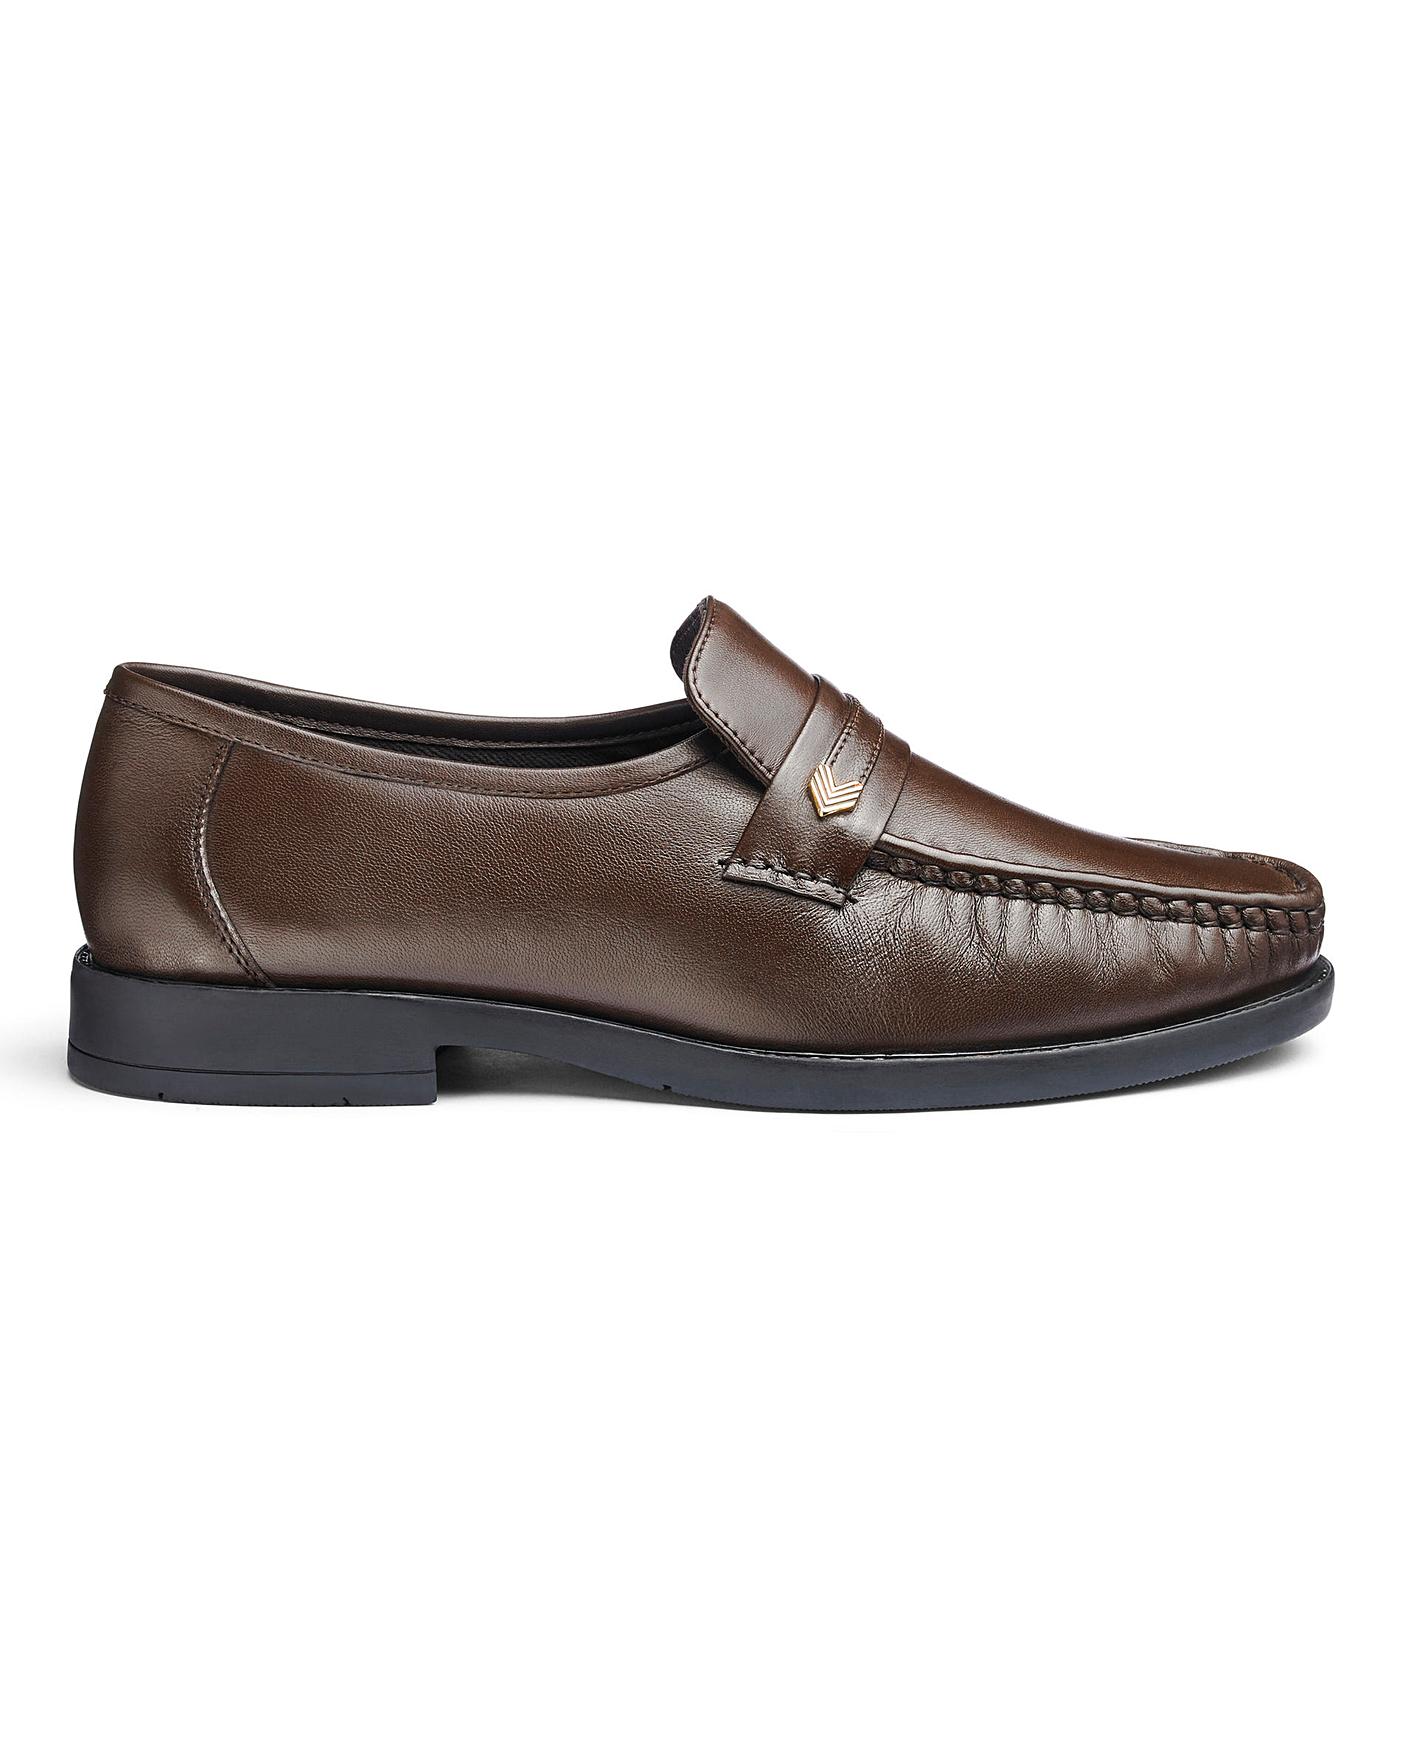 Leather Slip On Shoes Wide Fit | J D Williams